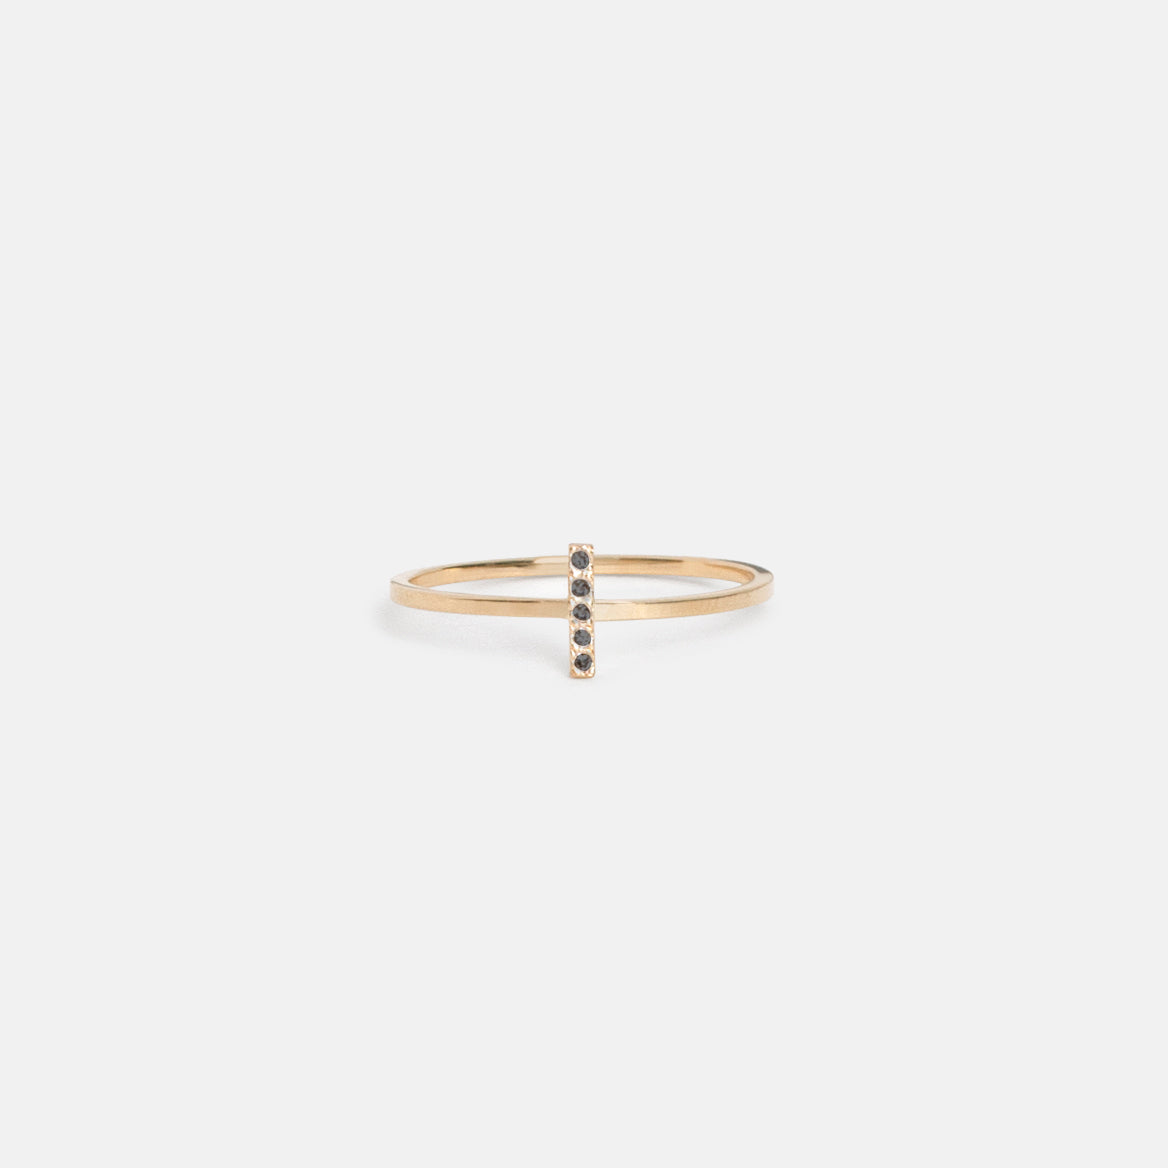 Stevi Thin Ring in 14k Gold set with Black Diamonds by SHW Fine Jewelry